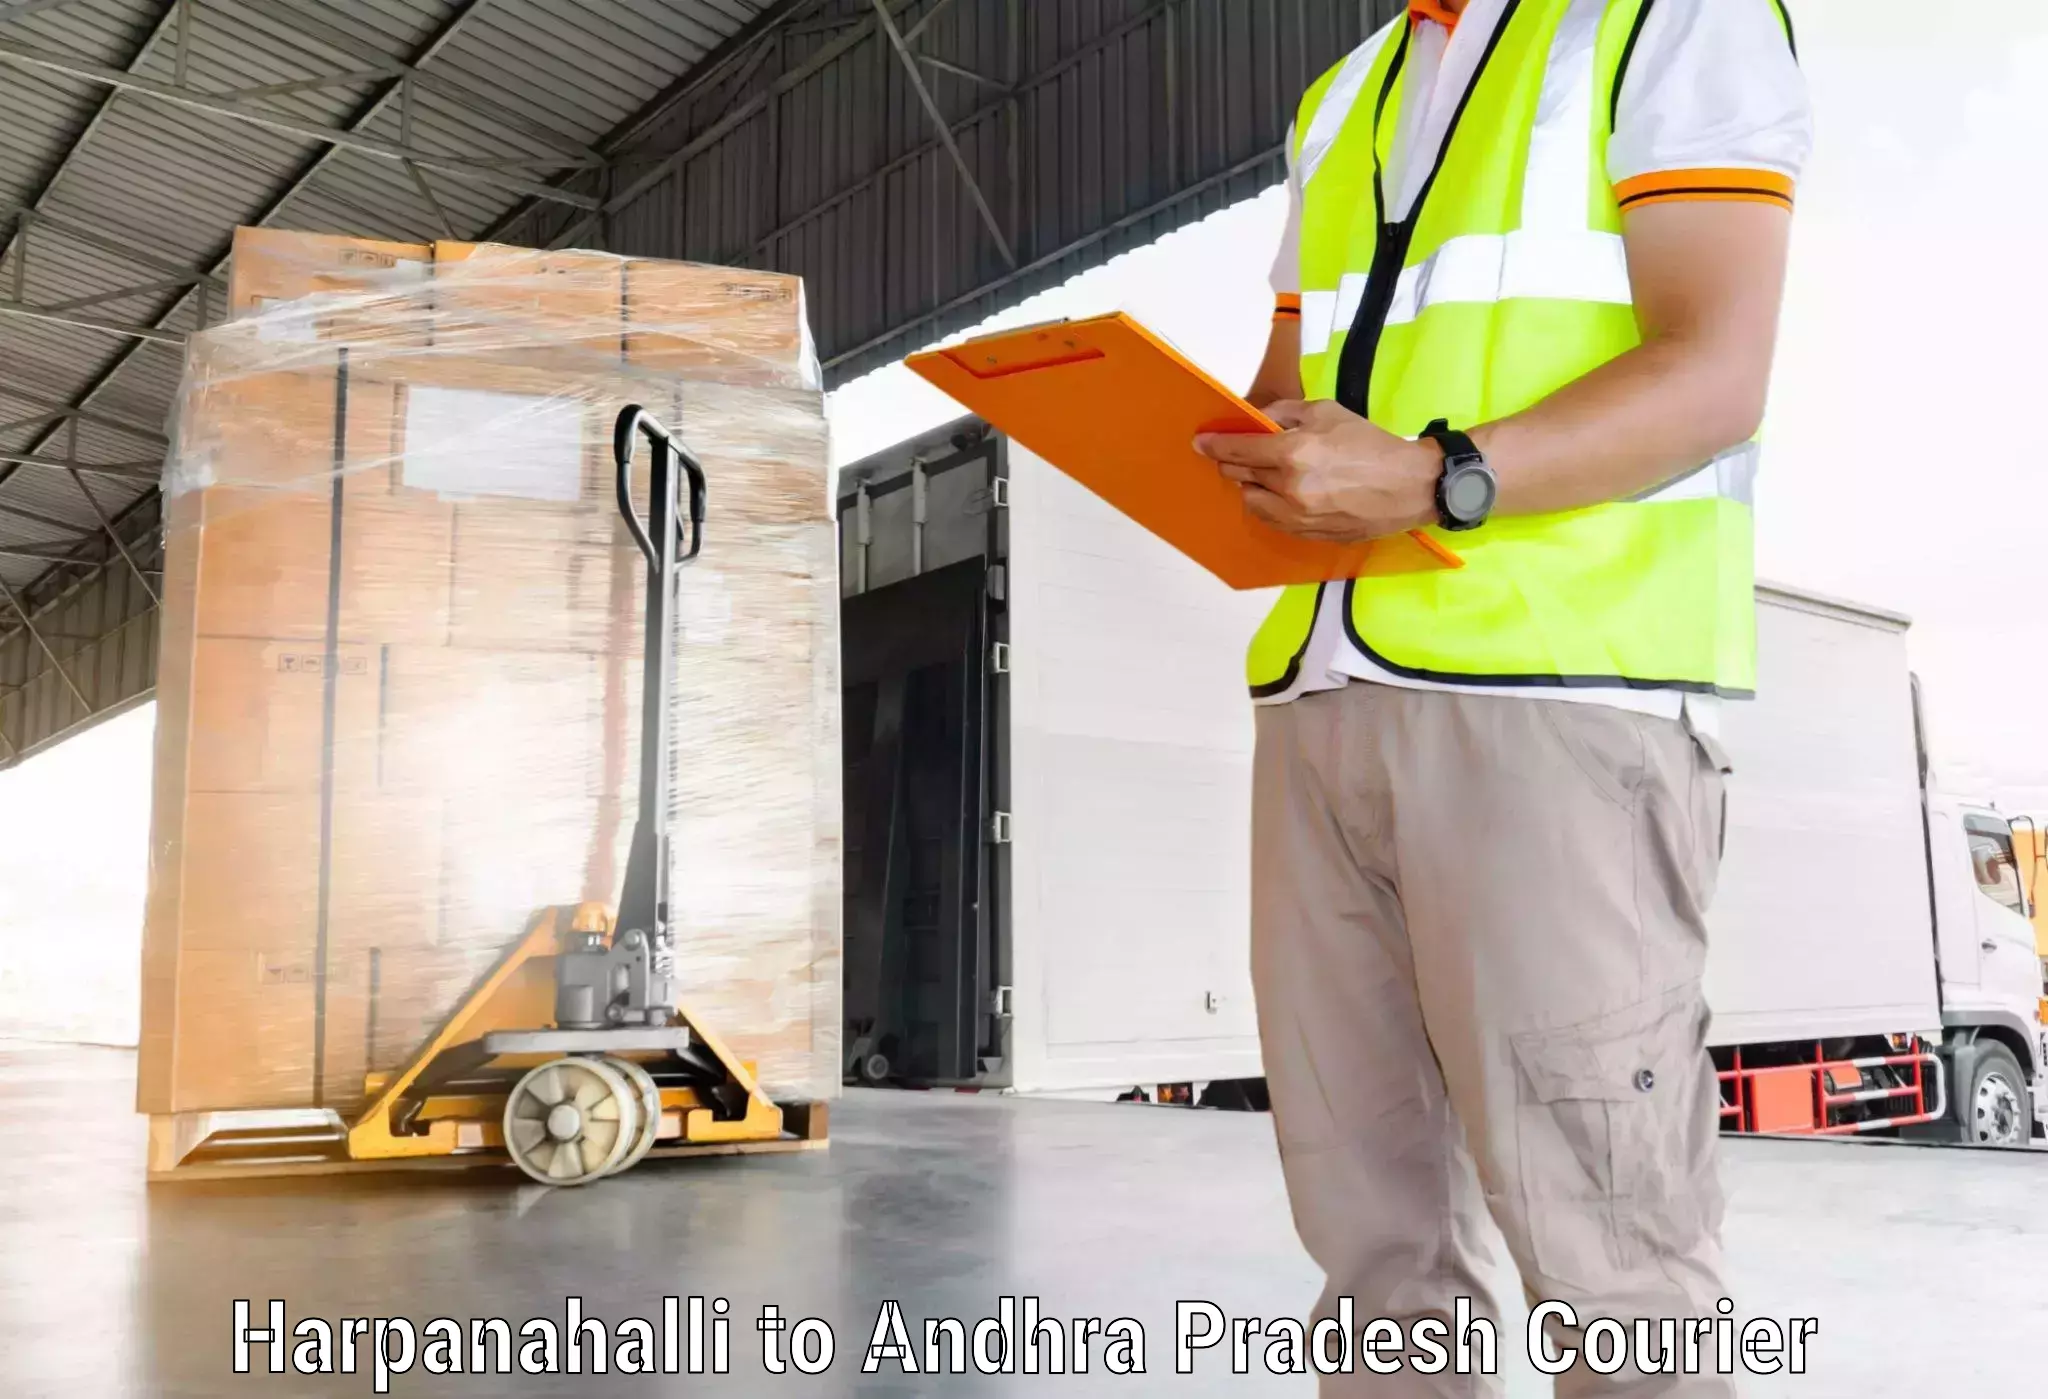 High-speed parcel service in Harpanahalli to Waltair